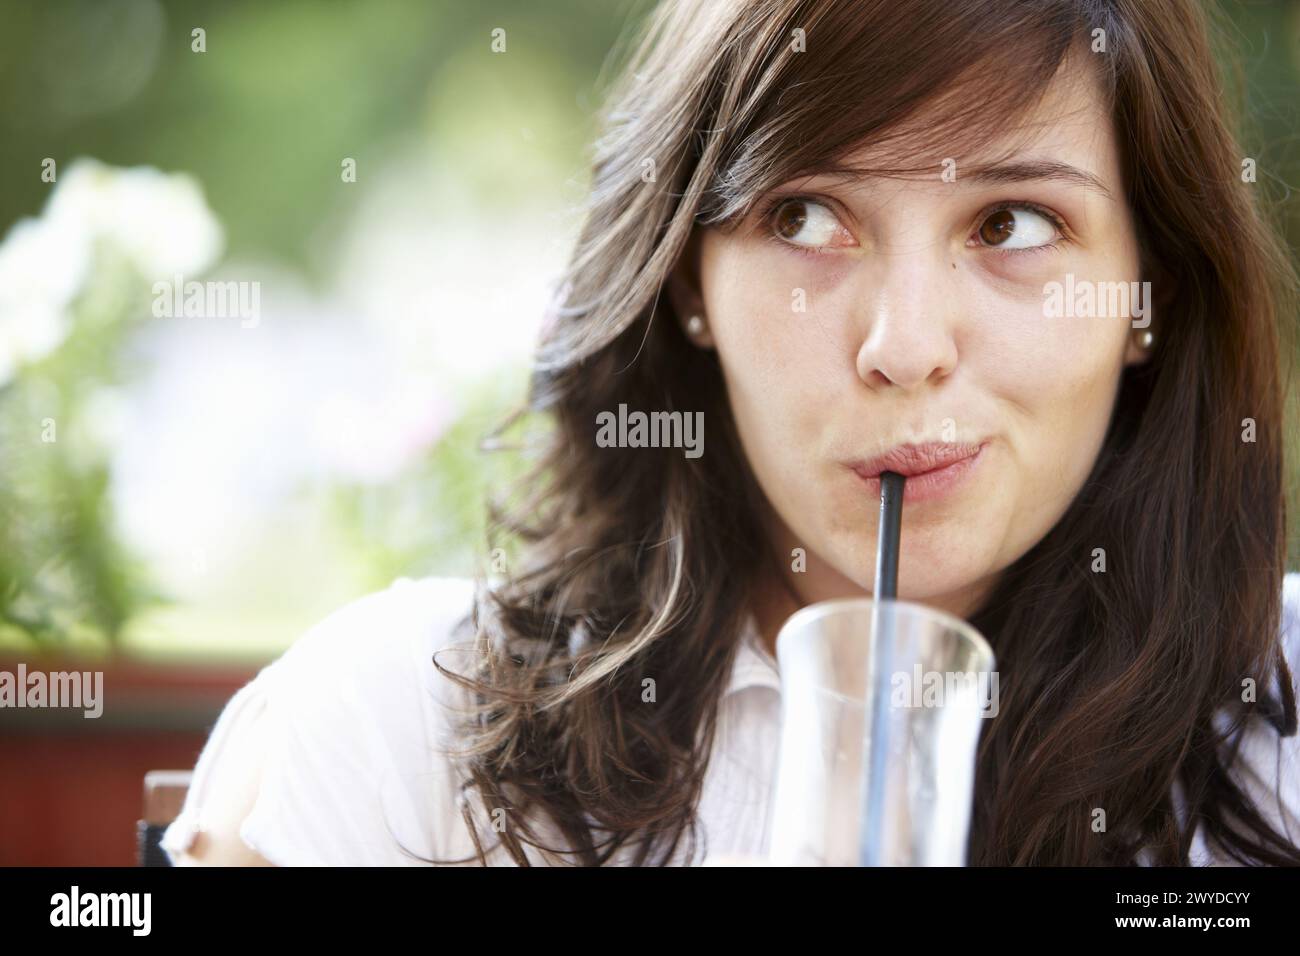 20 year old woman. Stock Photo